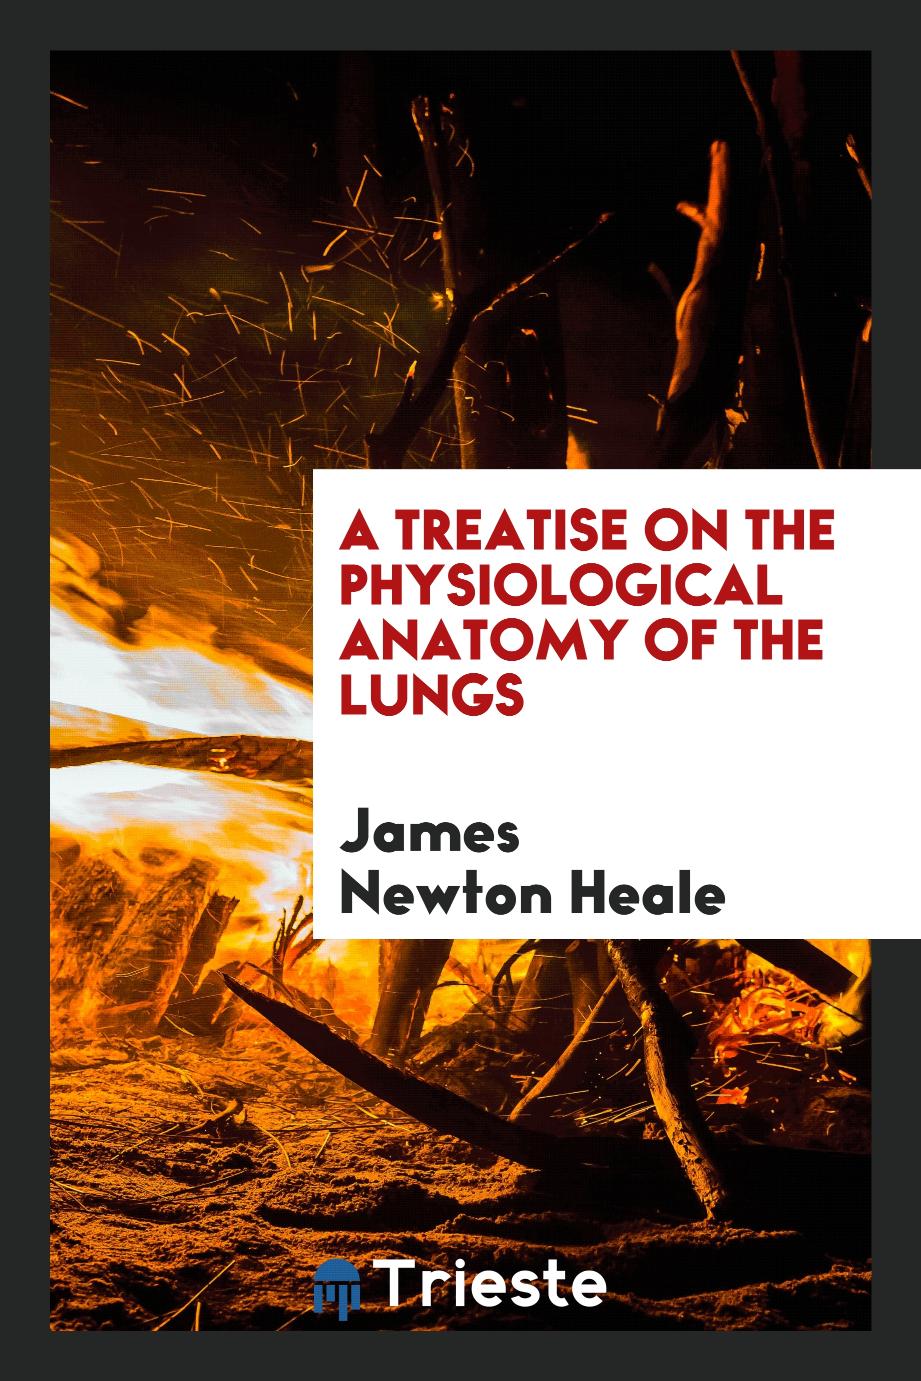 A Treatise on the Physiological Anatomy of the Lungs